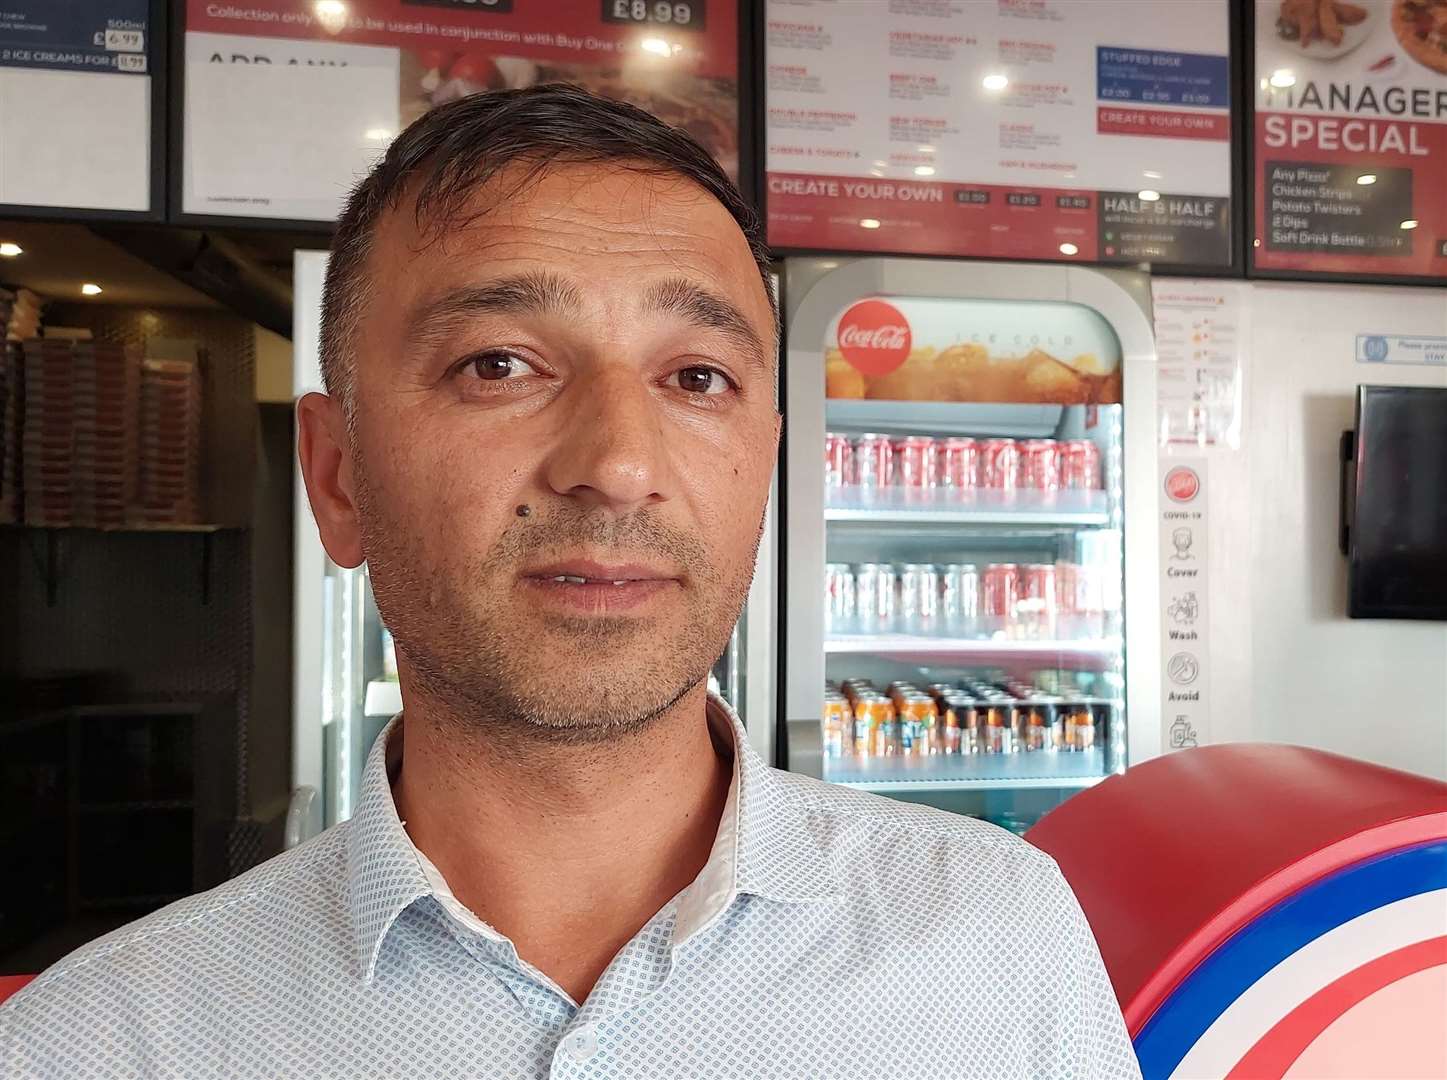 Abdul Rouf, owner of Pizza GoGo, feels his business is being unfairly targeted